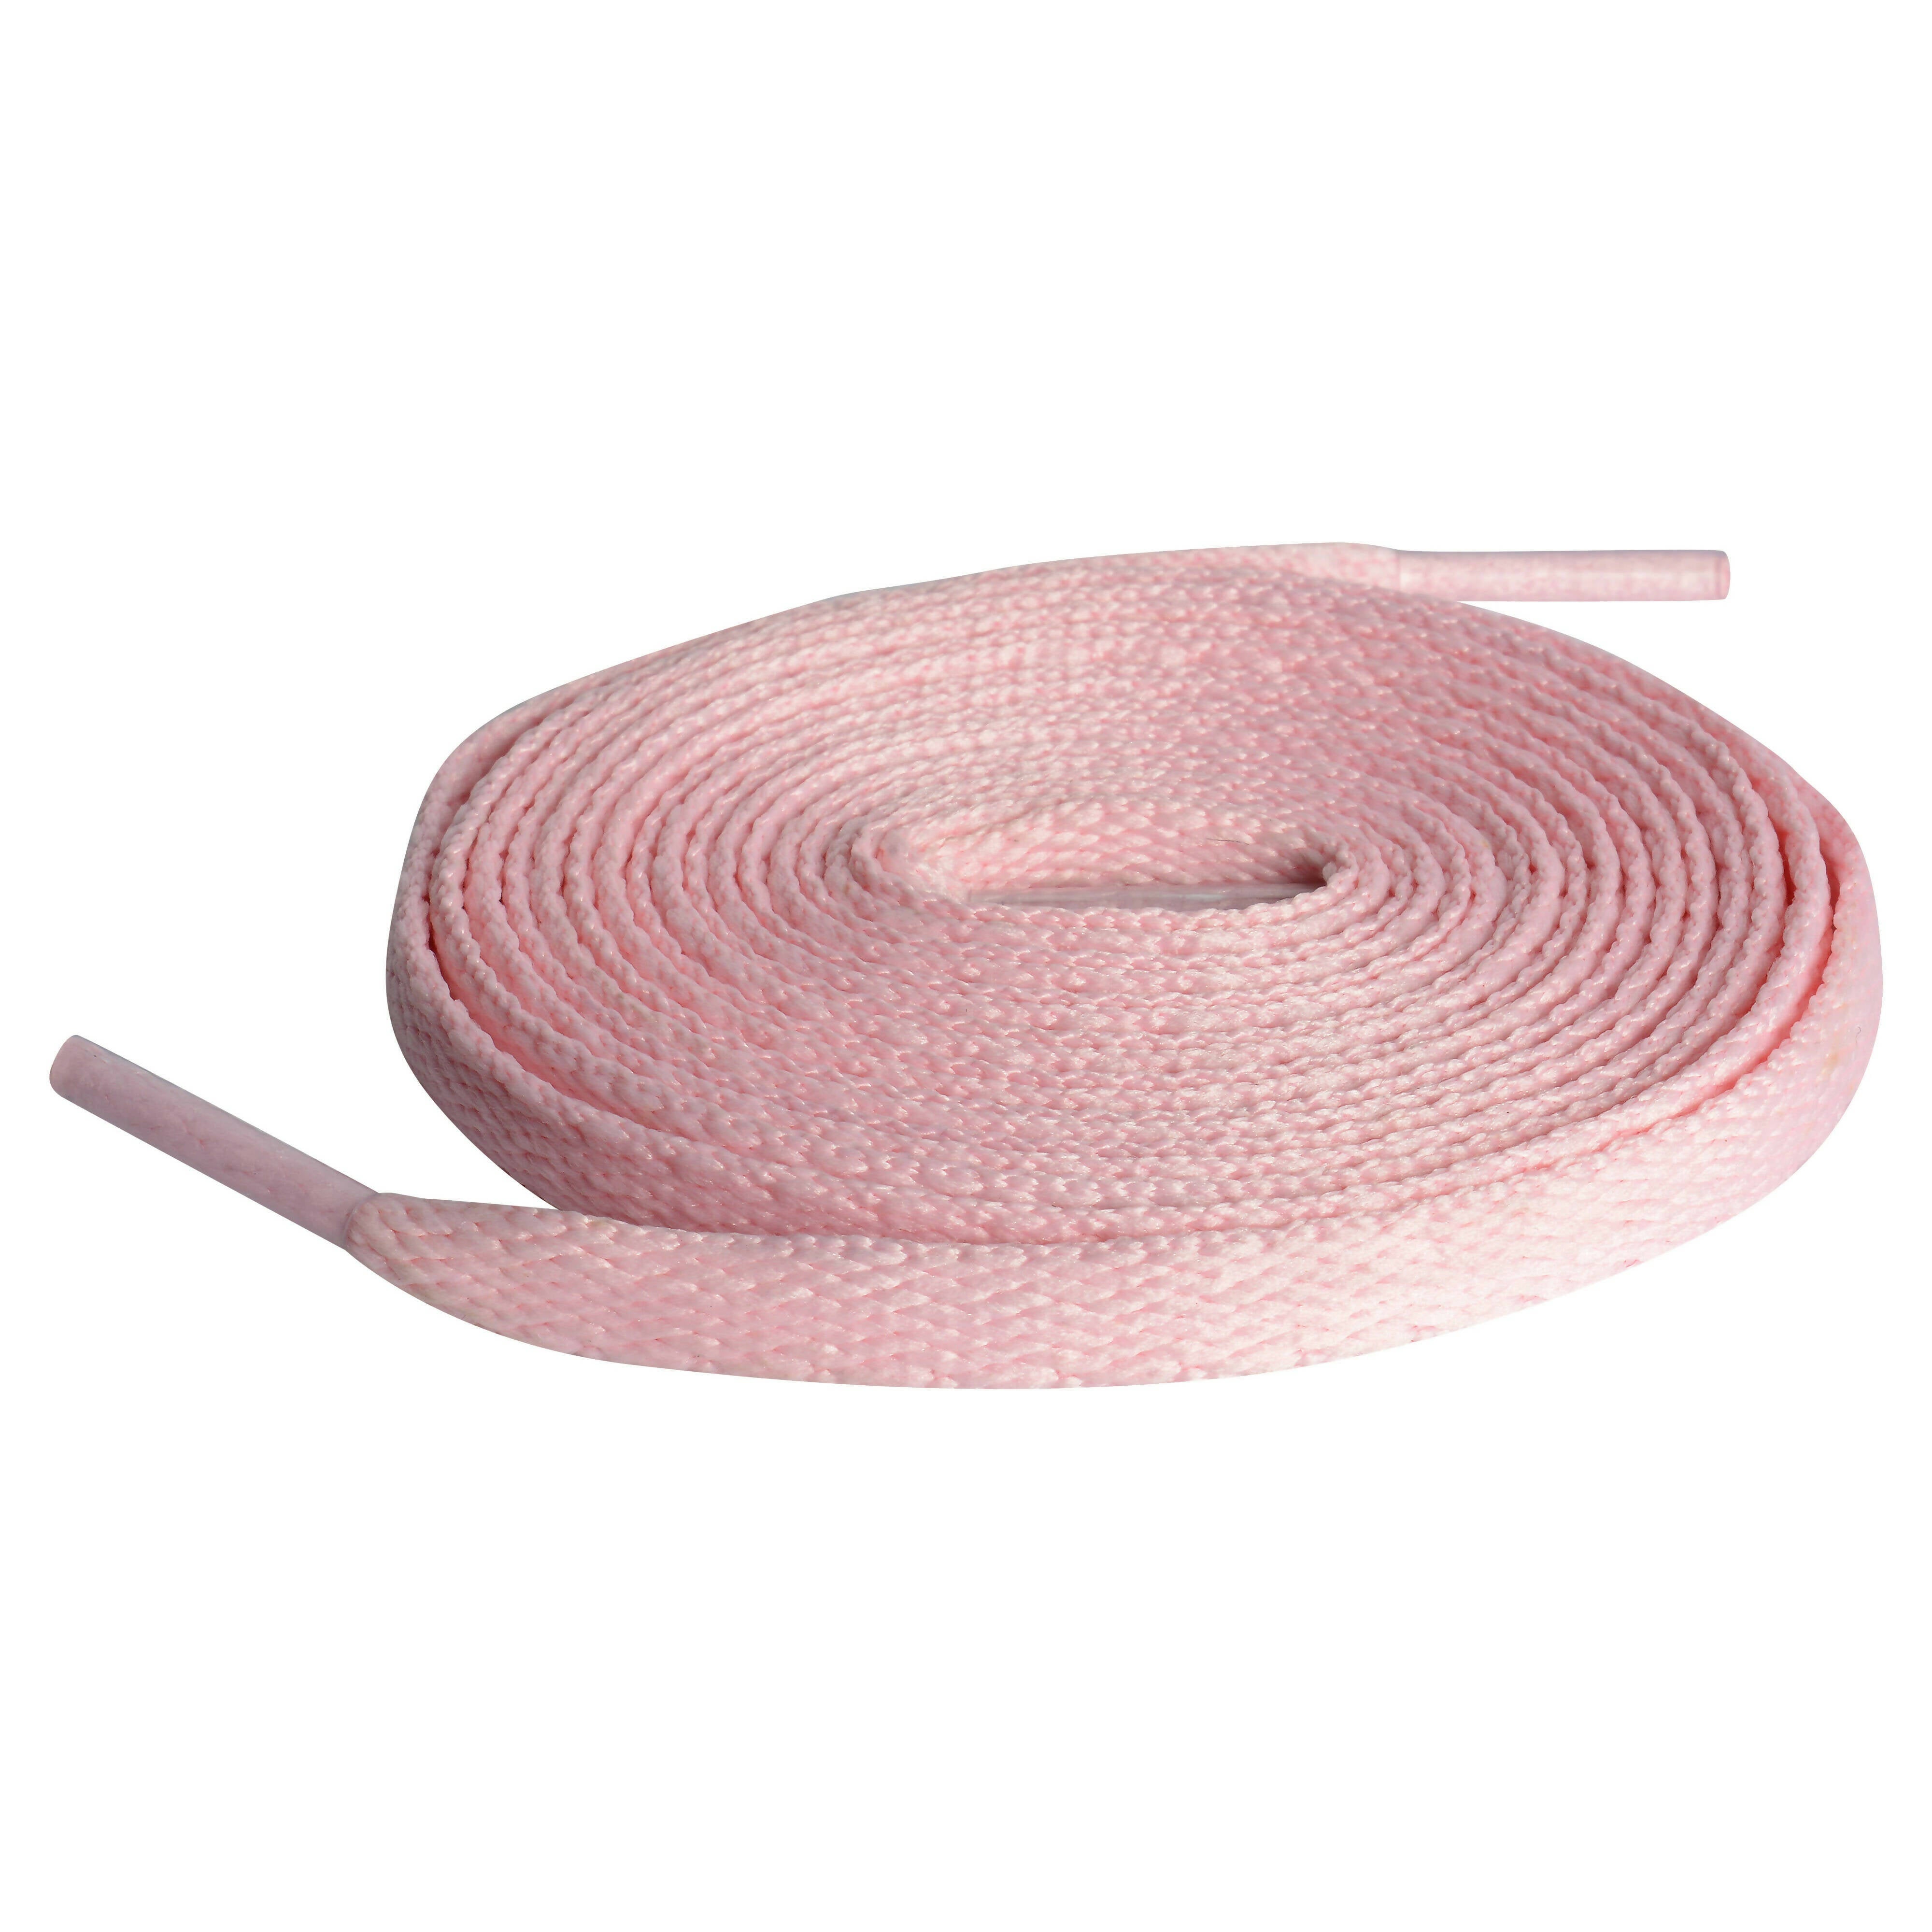 Flat Laces Pack of 7 ( UNC, Soft Pink,Peach,Cherry,Red,White,Black) 120cm